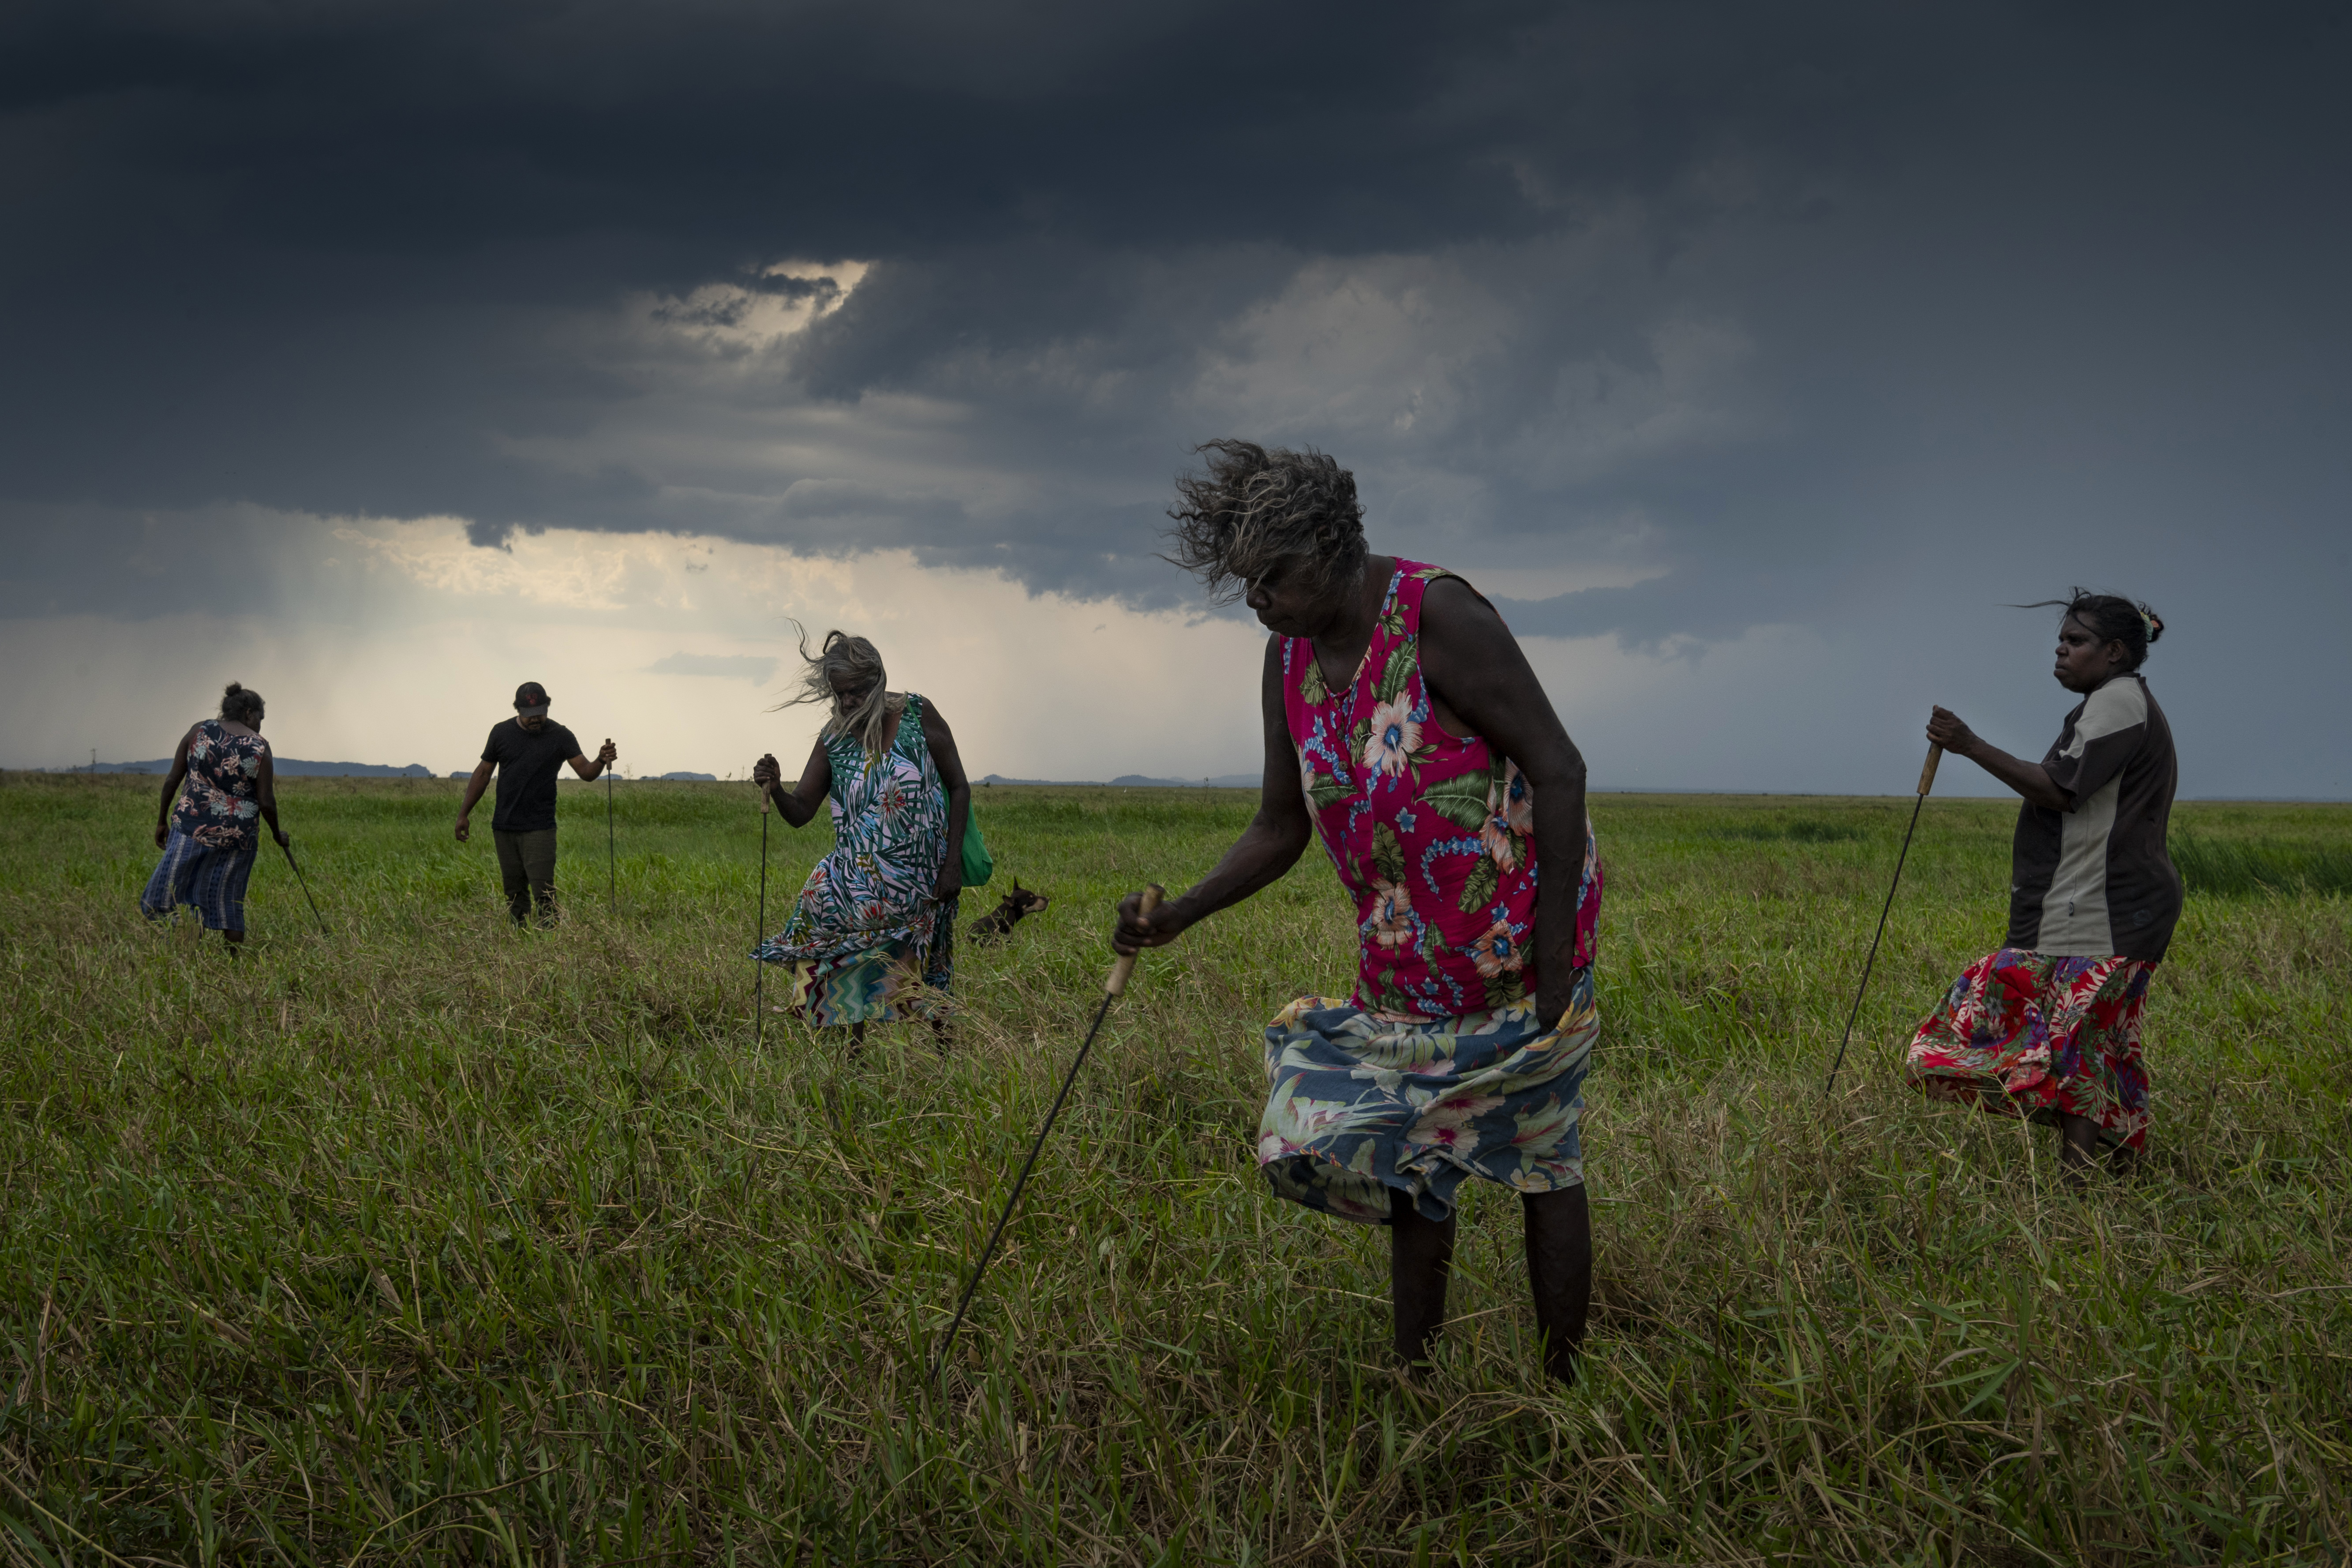 A group of Narwarddeken women elders hunt for turtles with homemade tools on floodplains near Gunbalanya, Arnhem Land, Australia. They spent all day finding just two turtles, which are a popular delicacy. Soon the grass will be burnt to make the hunt easier.